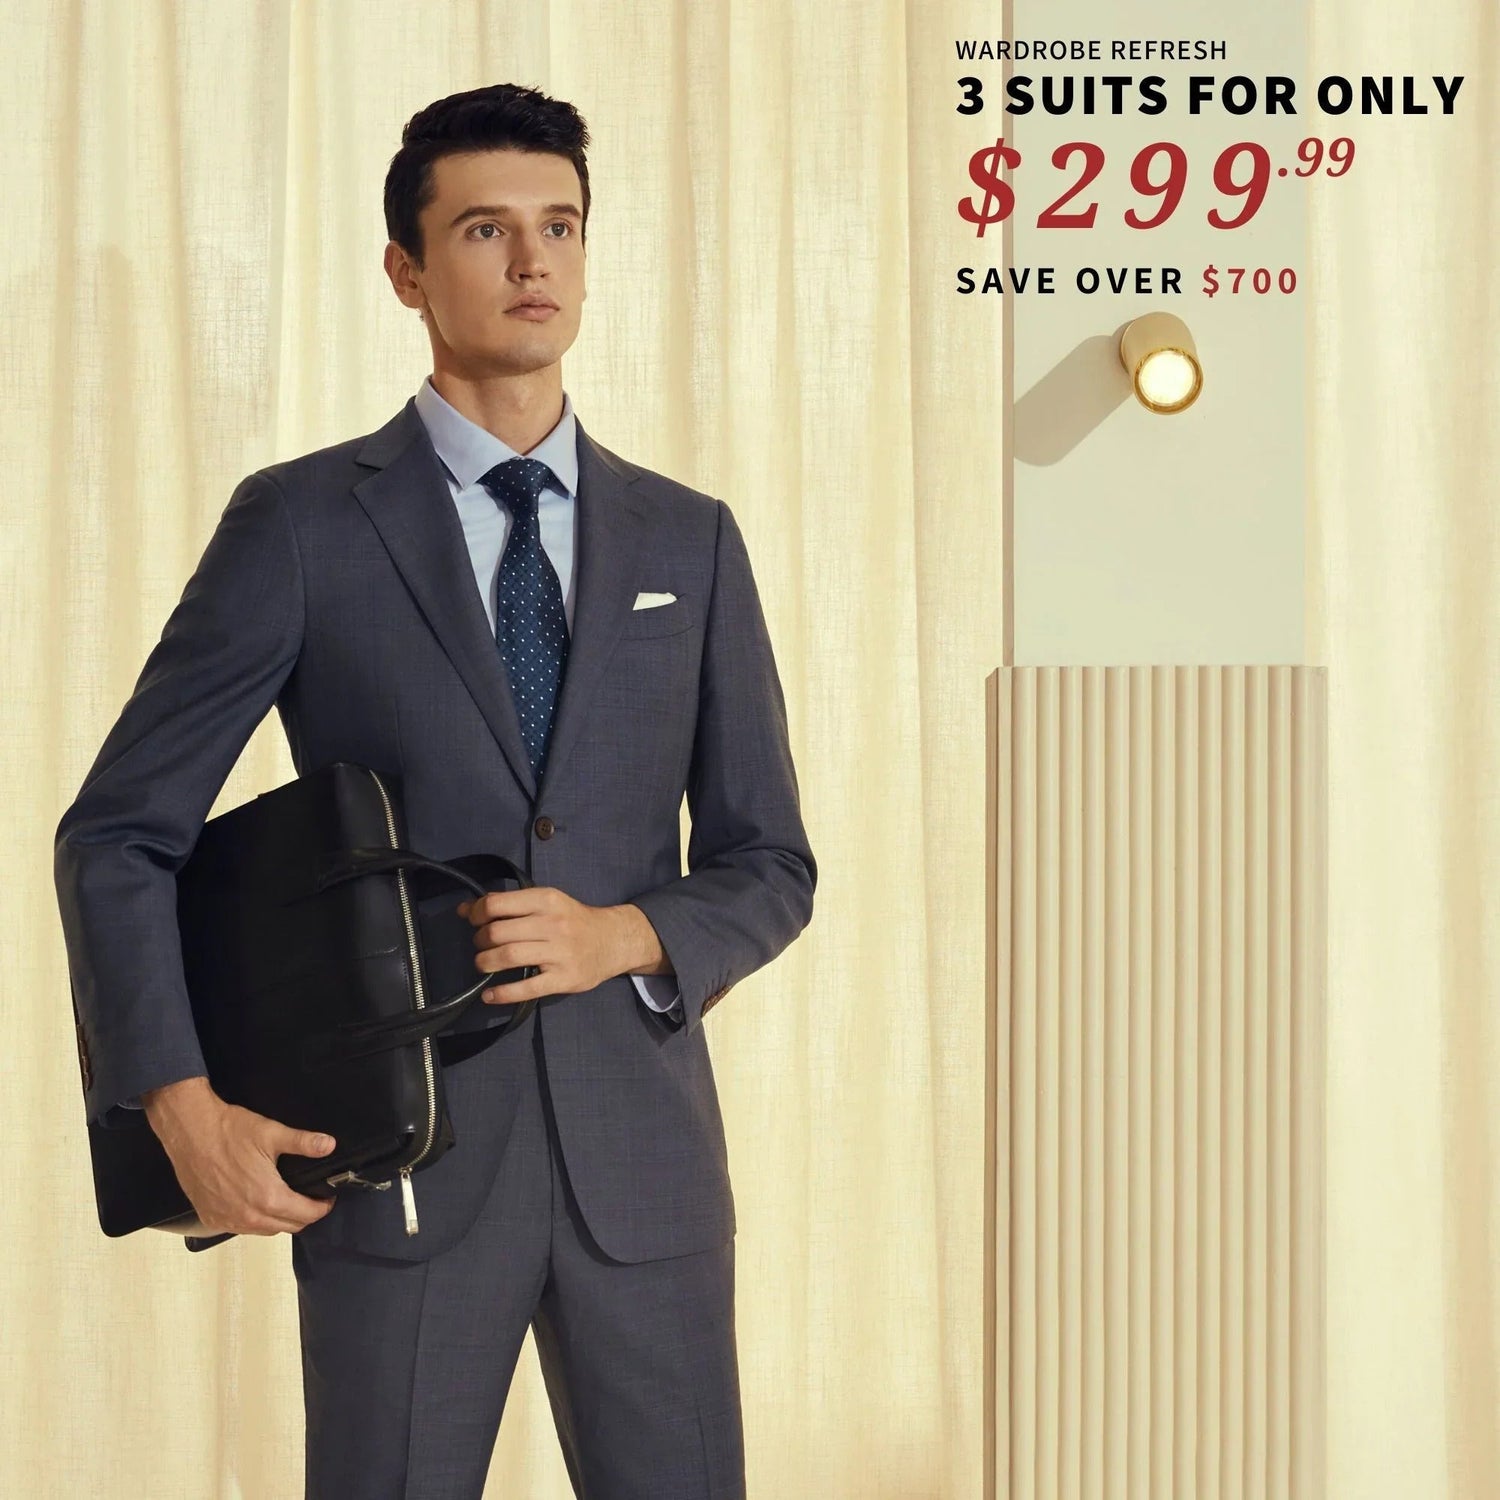 A man in a tailored, unhemmed suit holding a helmet, with an advertisement for a BYOB online only 3 Suits for $299 sale.